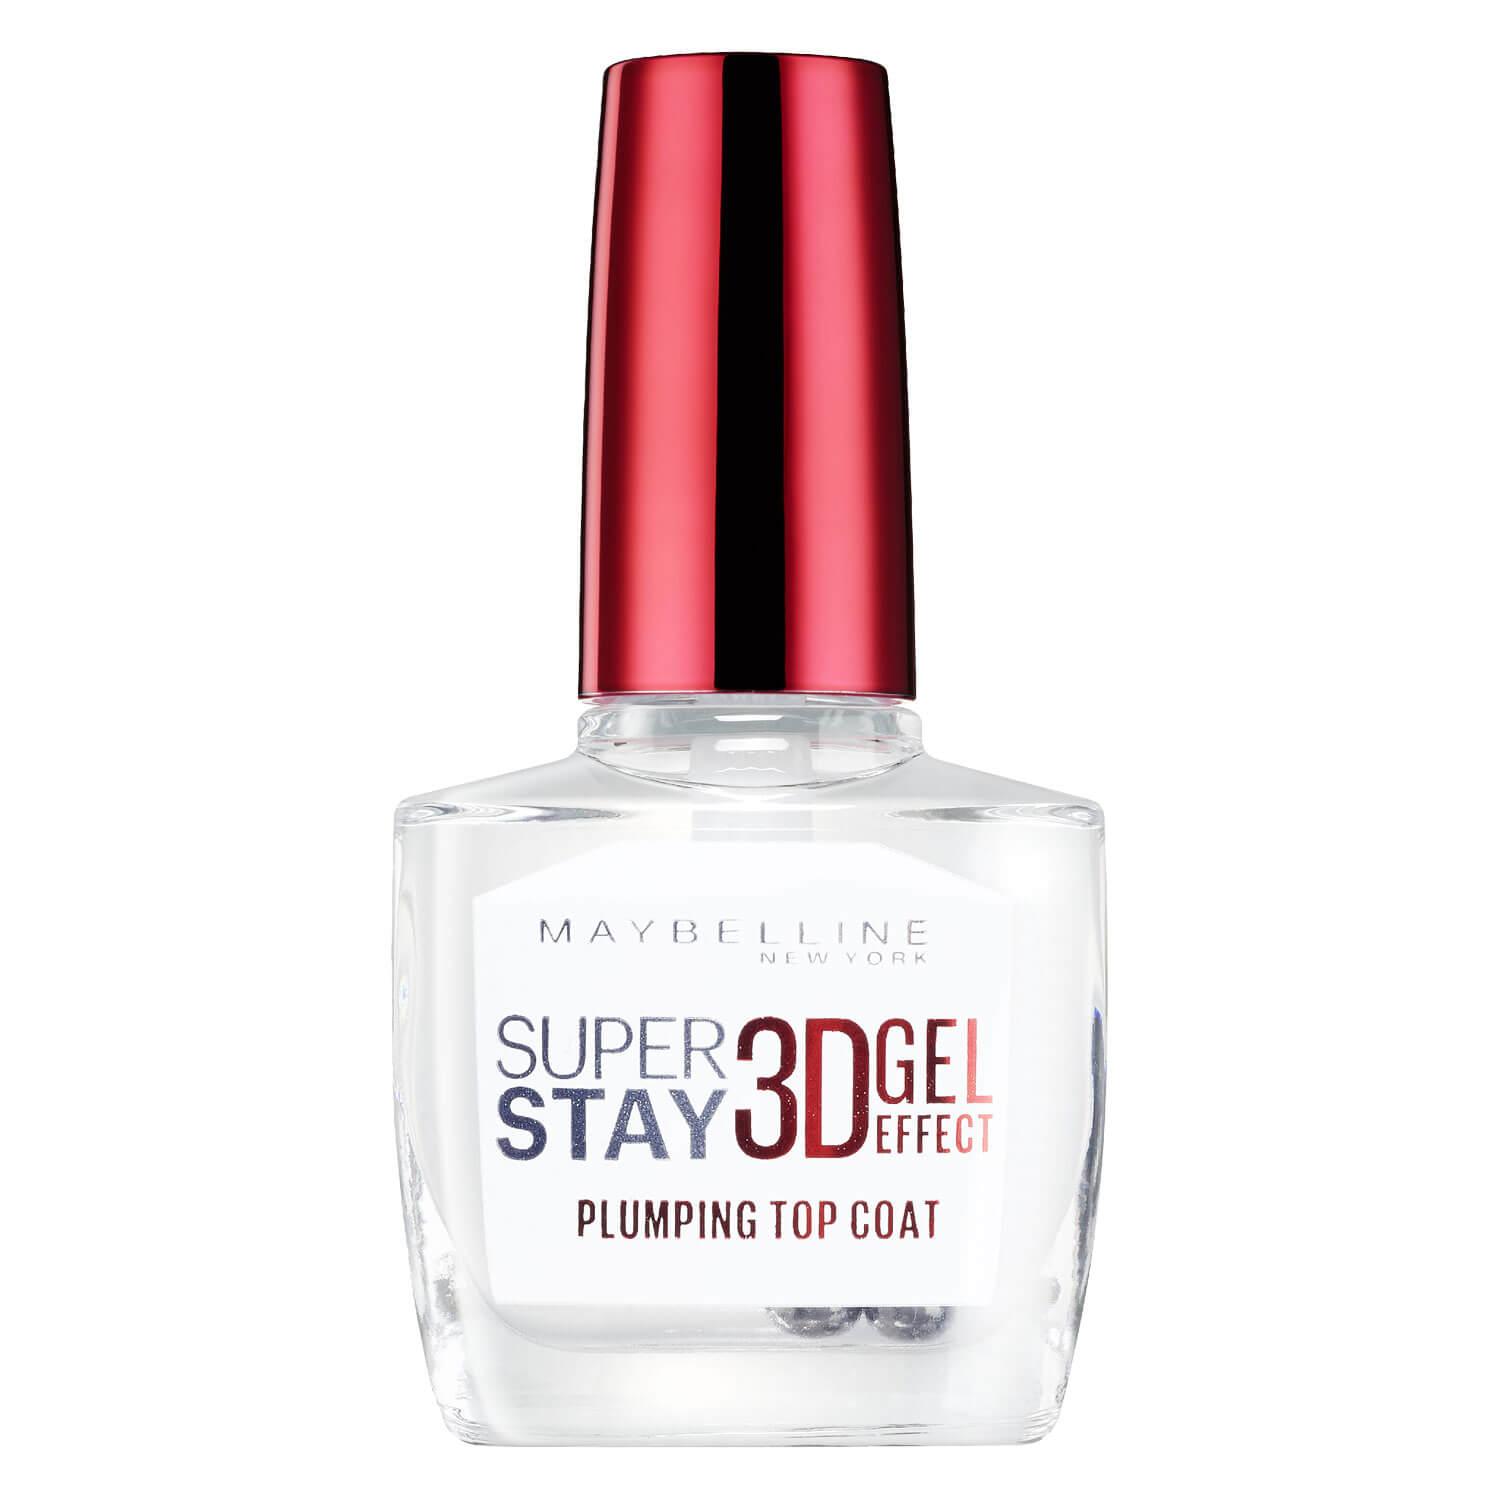 Maybelline NY Nails - Super Stay 3D Gel Effect Plumping Top Coat